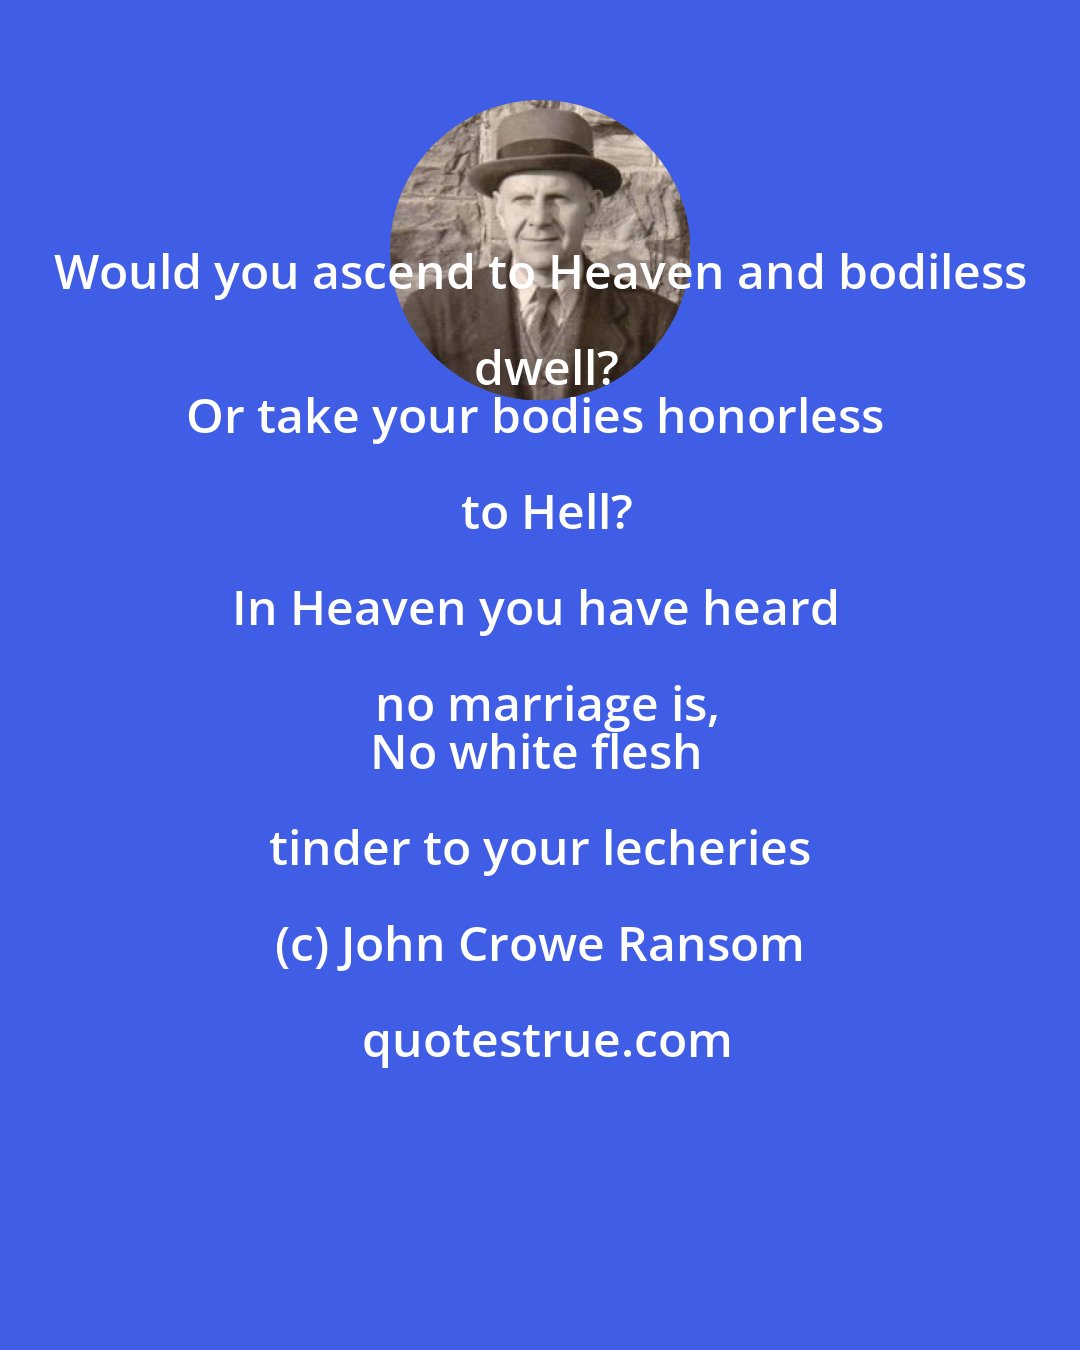 John Crowe Ransom: Would you ascend to Heaven and bodiless dwell?
Or take your bodies honorless to Hell?

In Heaven you have heard no marriage is,
No white flesh tinder to your lecheries